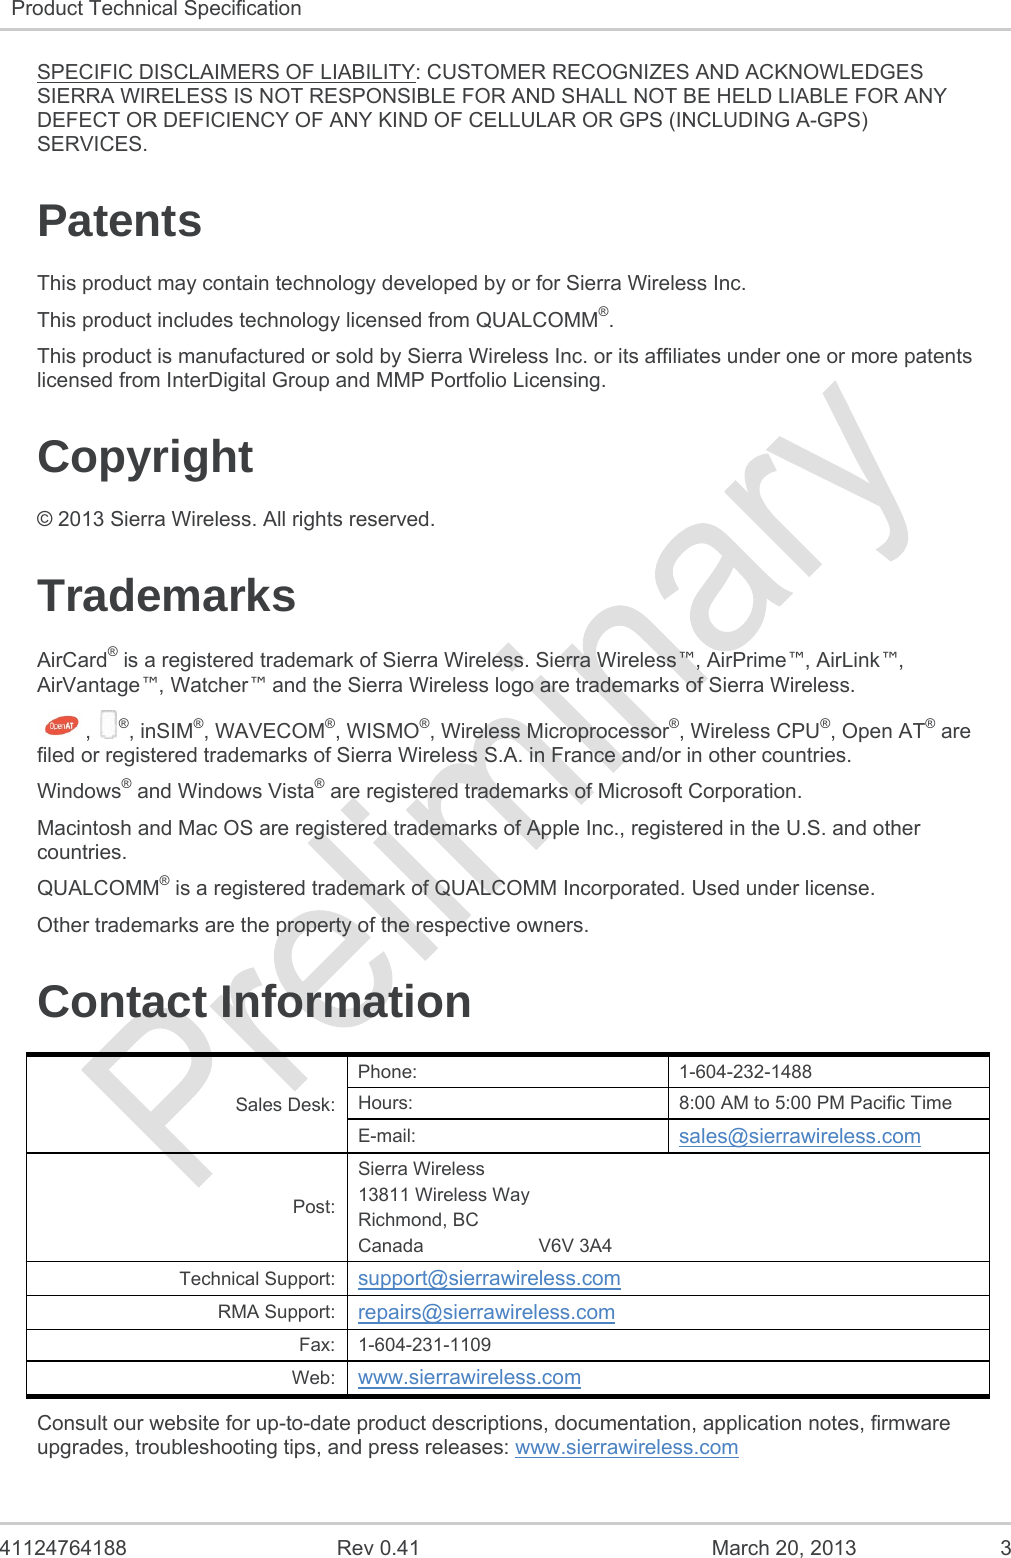   41124764188  Rev 0.41  March 20, 2013  3 Product Technical Specification   SPECIFIC DISCLAIMERS OF LIABILITY: CUSTOMER RECOGNIZES AND ACKNOWLEDGES SIERRA WIRELESS IS NOT RESPONSIBLE FOR AND SHALL NOT BE HELD LIABLE FOR ANY DEFECT OR DEFICIENCY OF ANY KIND OF CELLULAR OR GPS (INCLUDING A-GPS) SERVICES. Patents This product may contain technology developed by or for Sierra Wireless Inc. This product includes technology licensed from QUALCOMM®. This product is manufactured or sold by Sierra Wireless Inc. or its affiliates under one or more patents licensed from InterDigital Group and MMP Portfolio Licensing. Copyright © 2013 Sierra Wireless. All rights reserved. Trademarks AirCard® is a registered trademark of Sierra Wireless. Sierra Wireless™, AirPrime™, AirLink™, AirVantage™, Watcher™ and the Sierra Wireless logo are trademarks of Sierra Wireless. ,  ®, inSIM®, WAVECOM®, WISMO®, Wireless Microprocessor®, Wireless CPU®, Open AT® are filed or registered trademarks of Sierra Wireless S.A. in France and/or in other countries. Windows® and Windows Vista® are registered trademarks of Microsoft Corporation. Macintosh and Mac OS are registered trademarks of Apple Inc., registered in the U.S. and other countries. QUALCOMM® is a registered trademark of QUALCOMM Incorporated. Used under license. Other trademarks are the property of the respective owners. Contact Information Sales Desk: Phone: 1-604-232-1488 Hours:  8:00 AM to 5:00 PM Pacific Time E-mail:  sales@sierrawireless.com Post: Sierra Wireless 13811 Wireless Way Richmond, BC Canada                      V6V 3A4 Technical Support:  support@sierrawireless.com RMA Support:  repairs@sierrawireless.com Fax: 1-604-231-1109 Web:  www.sierrawireless.com Consult our website for up-to-date product descriptions, documentation, application notes, firmware upgrades, troubleshooting tips, and press releases: www.sierrawireless.com 